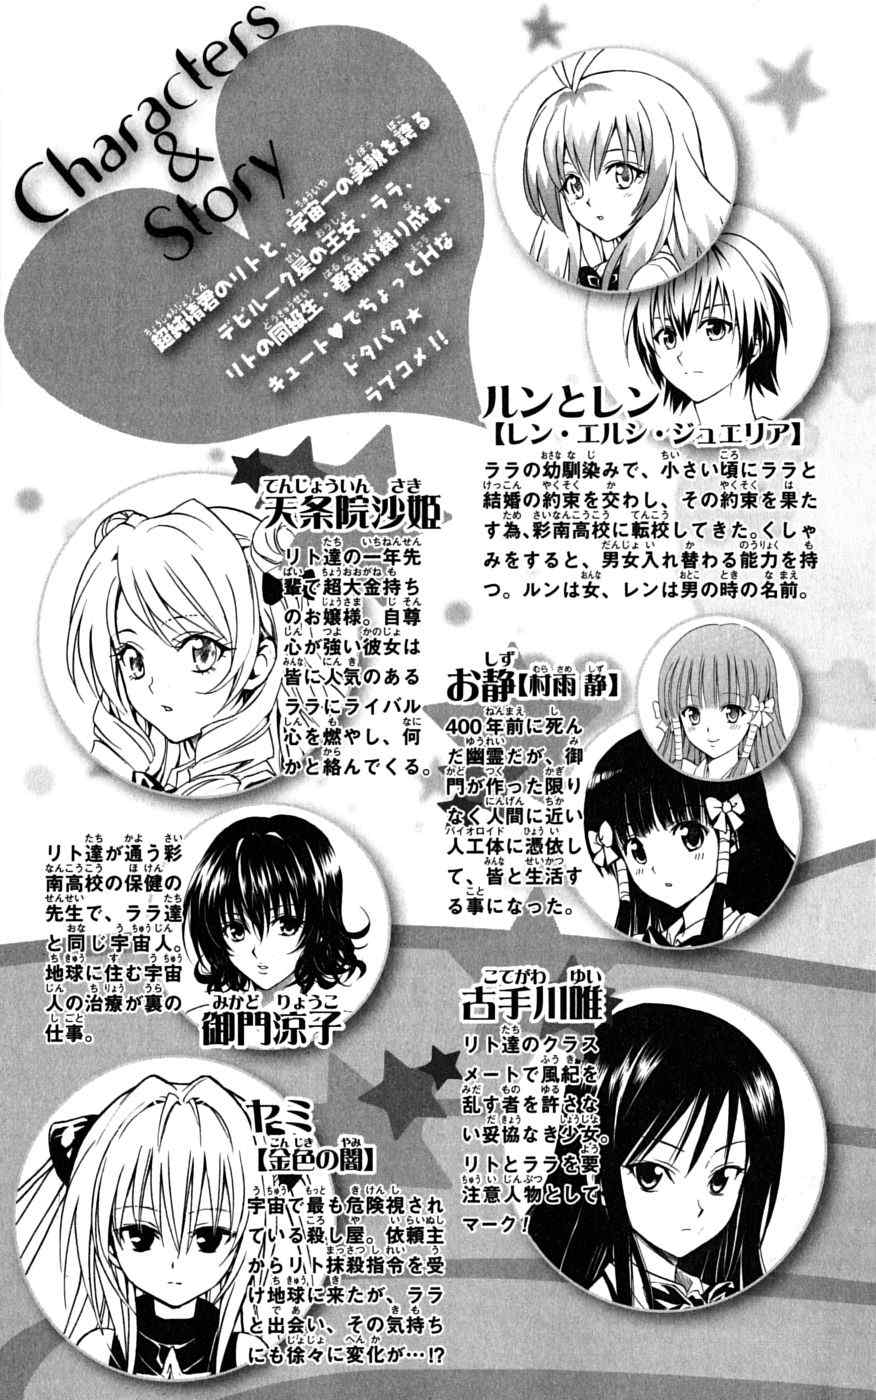 《To LOVEるとらぶる》漫画 To LOVE 12卷